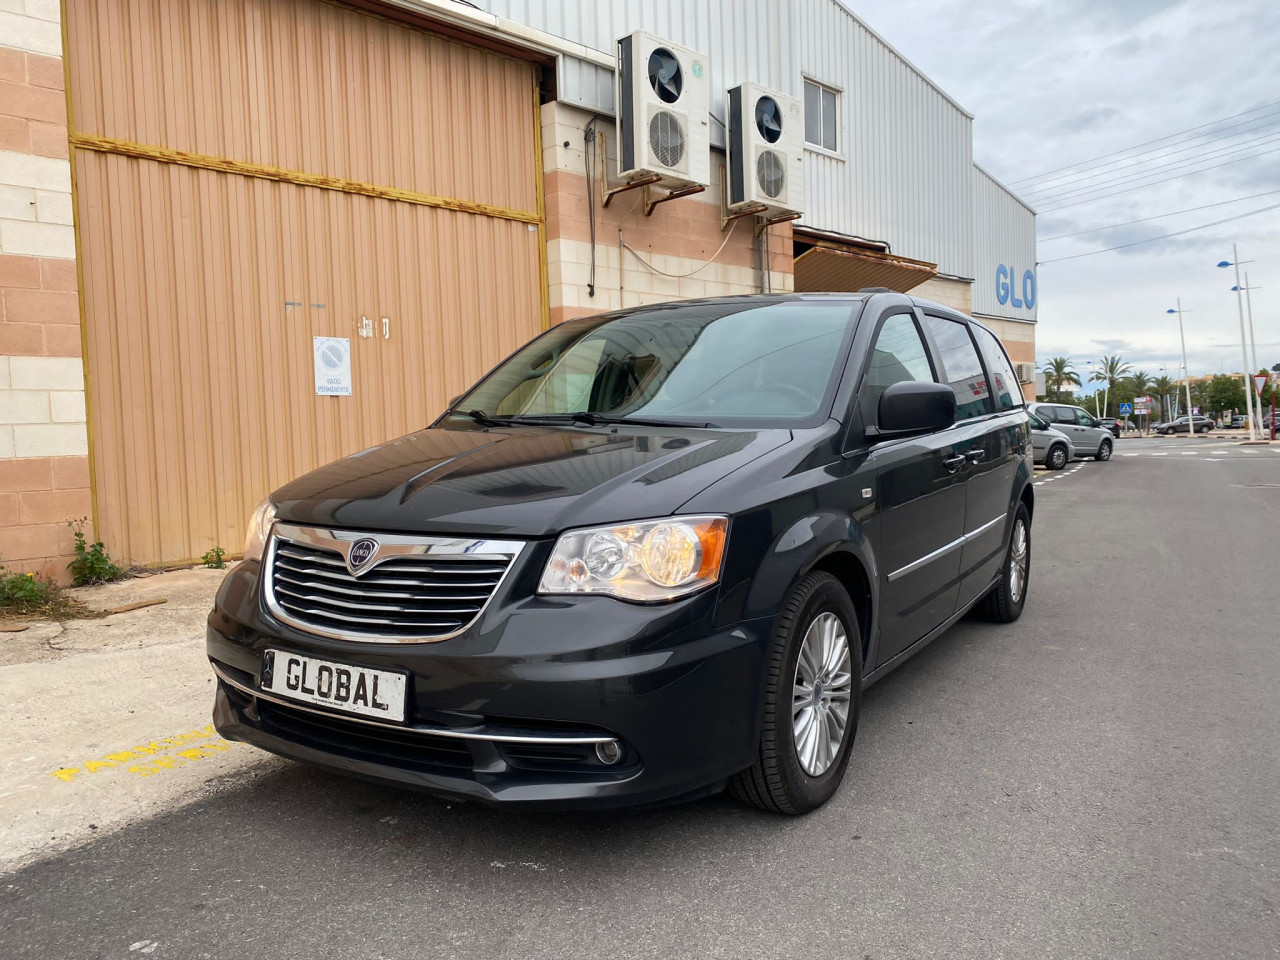 Lancia Grand Voyager 2.8 Crdi Gold Automatic People carrier 2012 